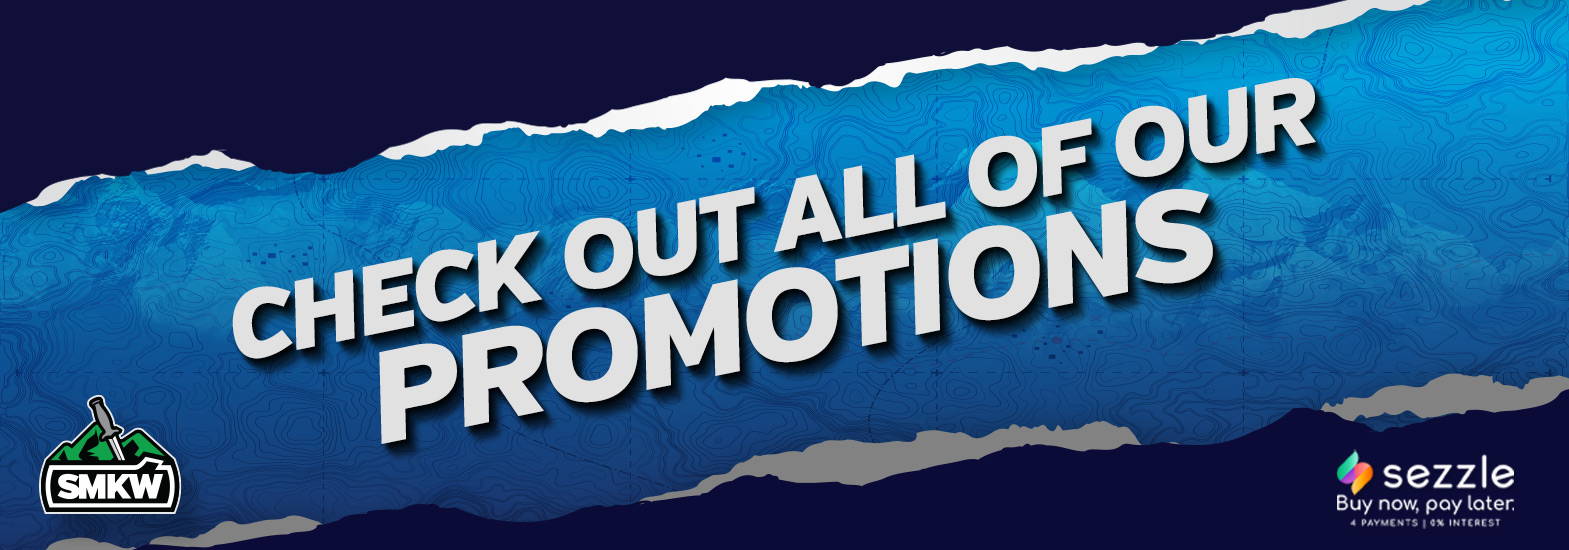 Check out all of our promotions